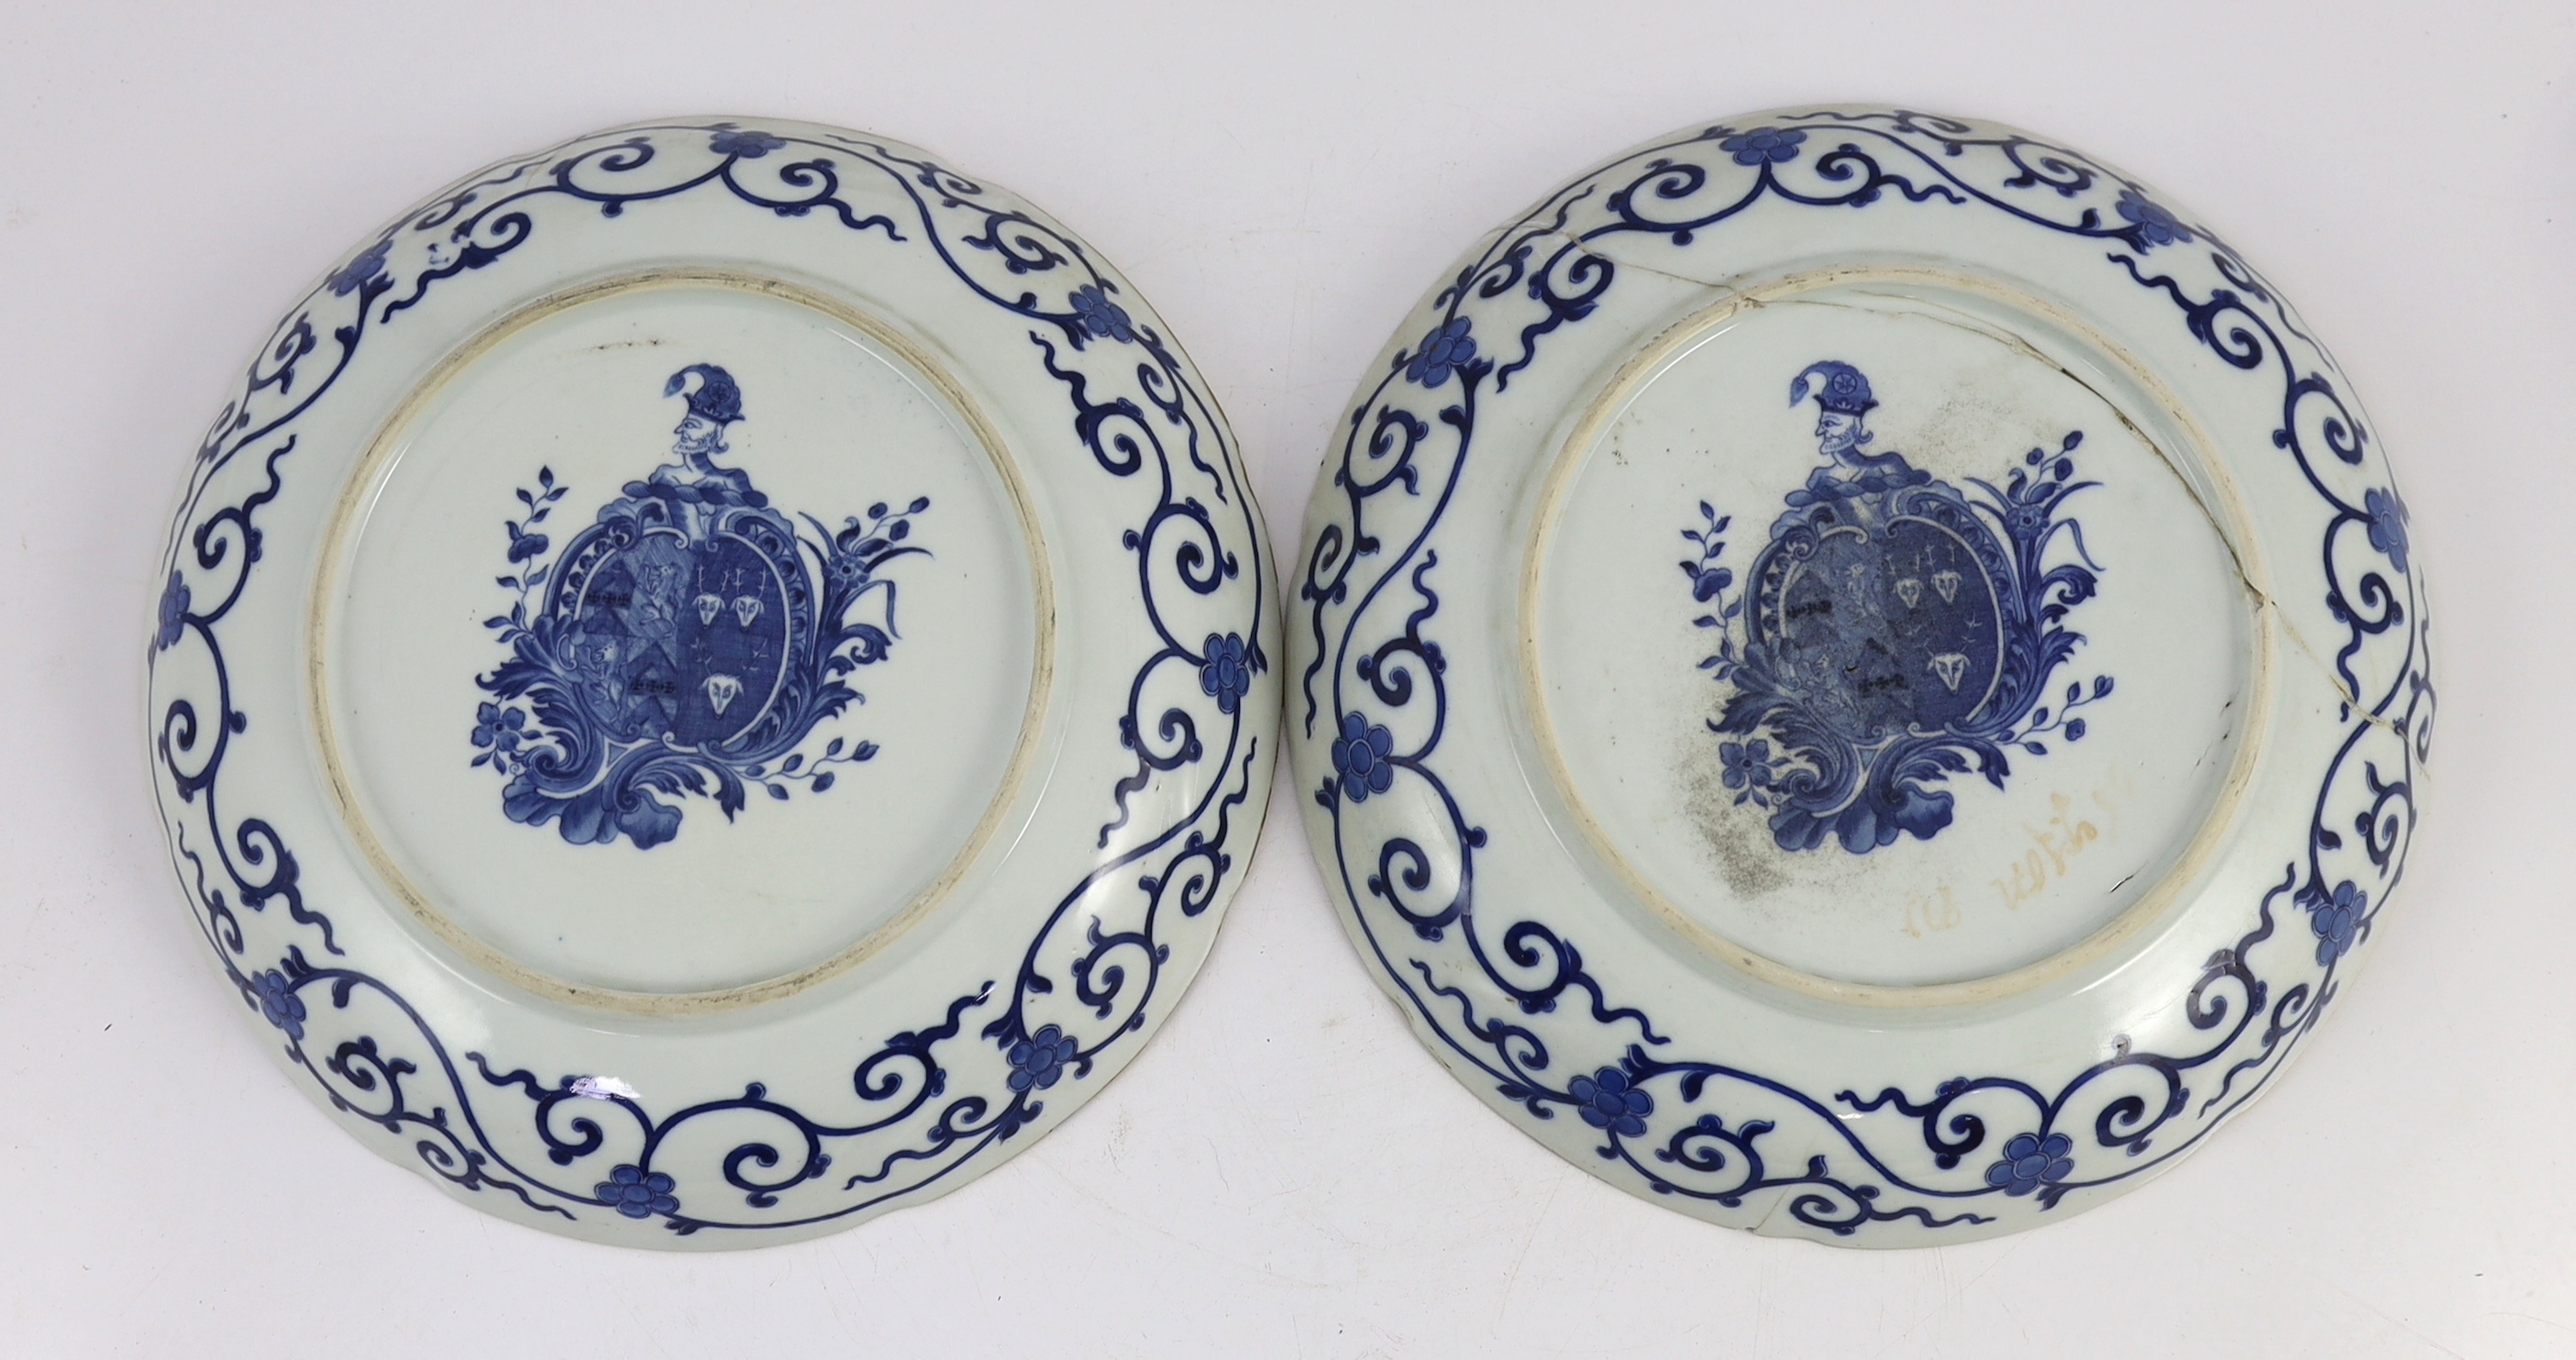 A pair of Chinese blue and white armorial dishes in Japanese Kakiemon style, Qianlong period, c. - Image 3 of 5